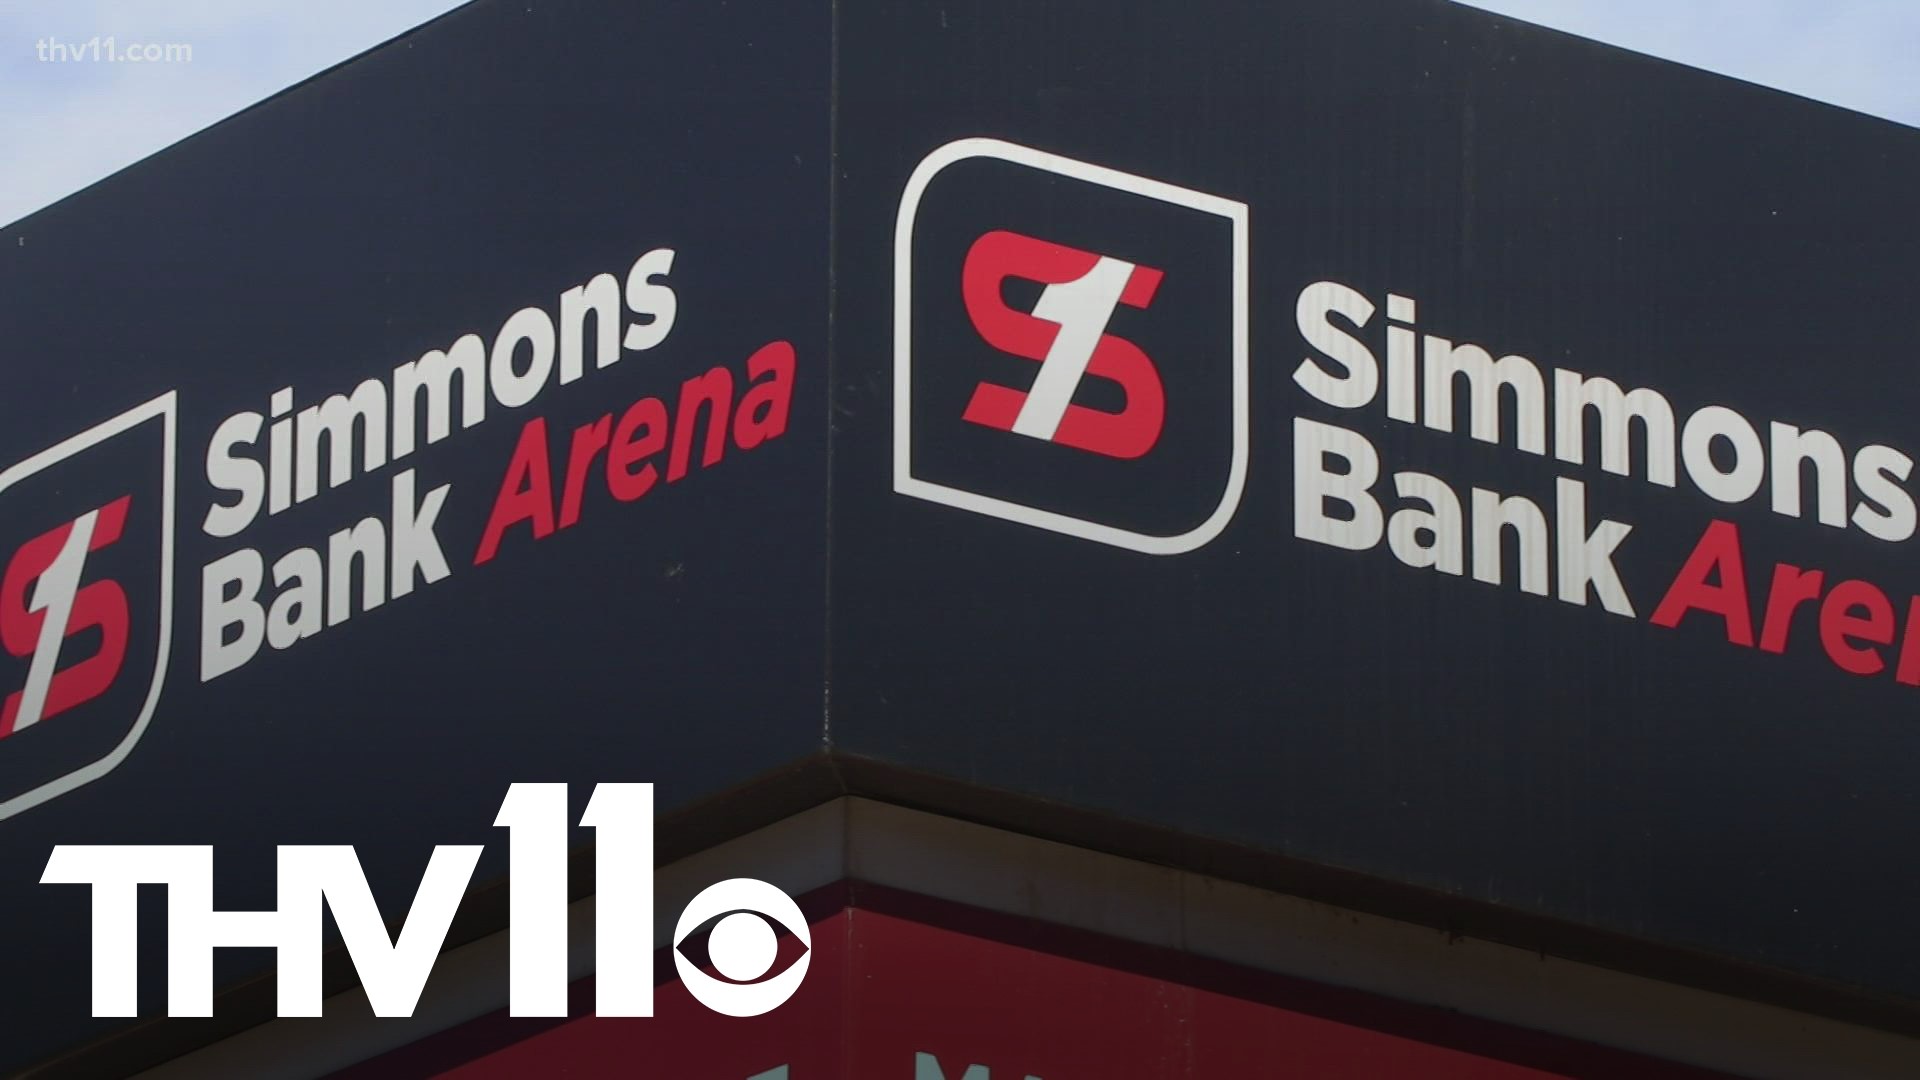 Simmons Bank Arena announced another big name coming to the concert venue in North Little Rock.